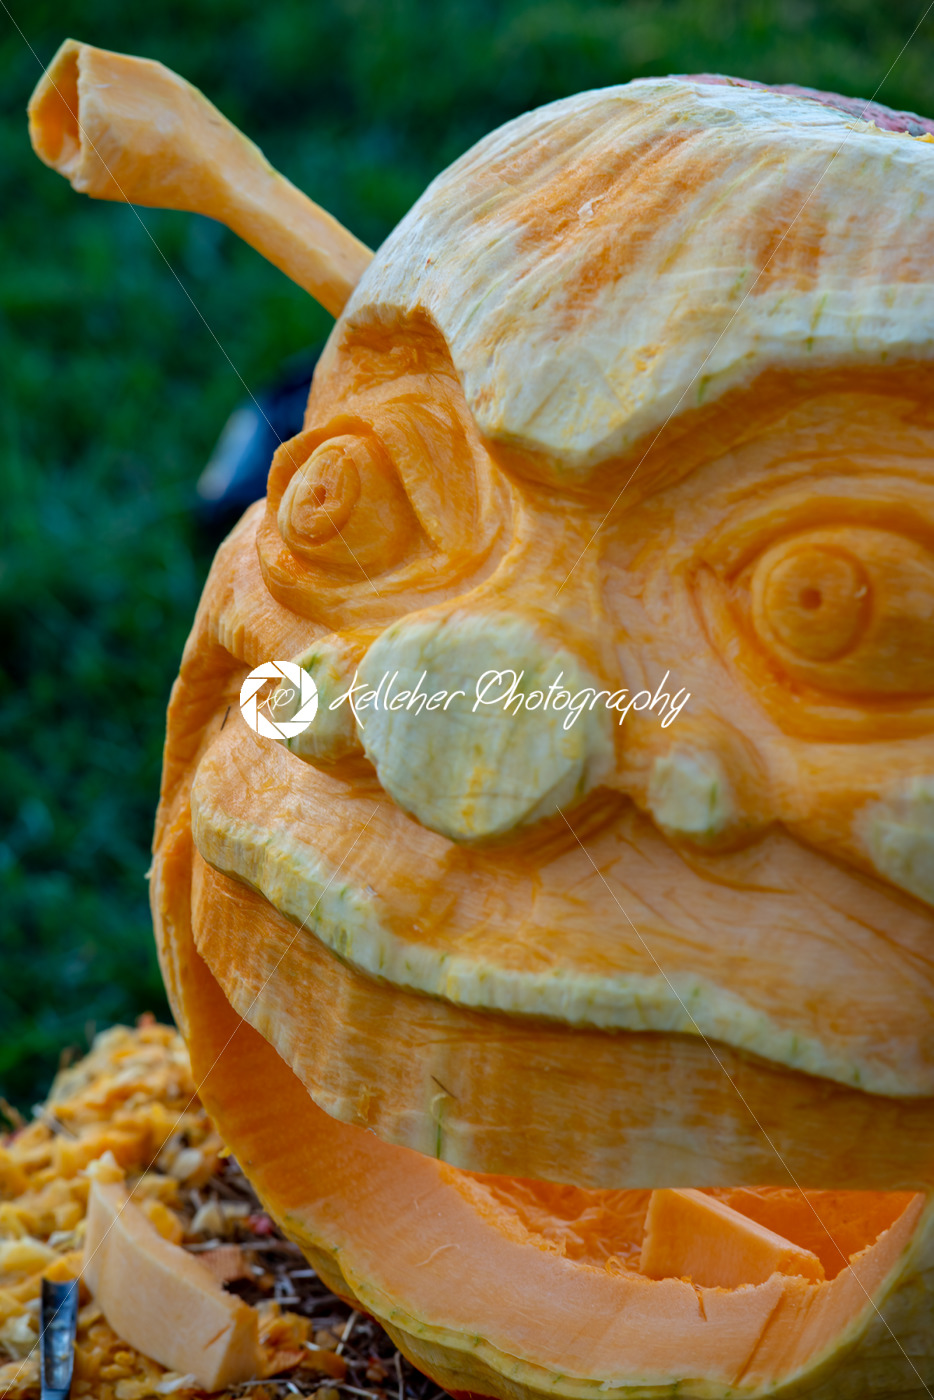 CHADDS FORD, PA – OCTOBER 18: Shrek at The Great Pumpkin Carve carving contest on October 18, 2018 - Kelleher Photography Store